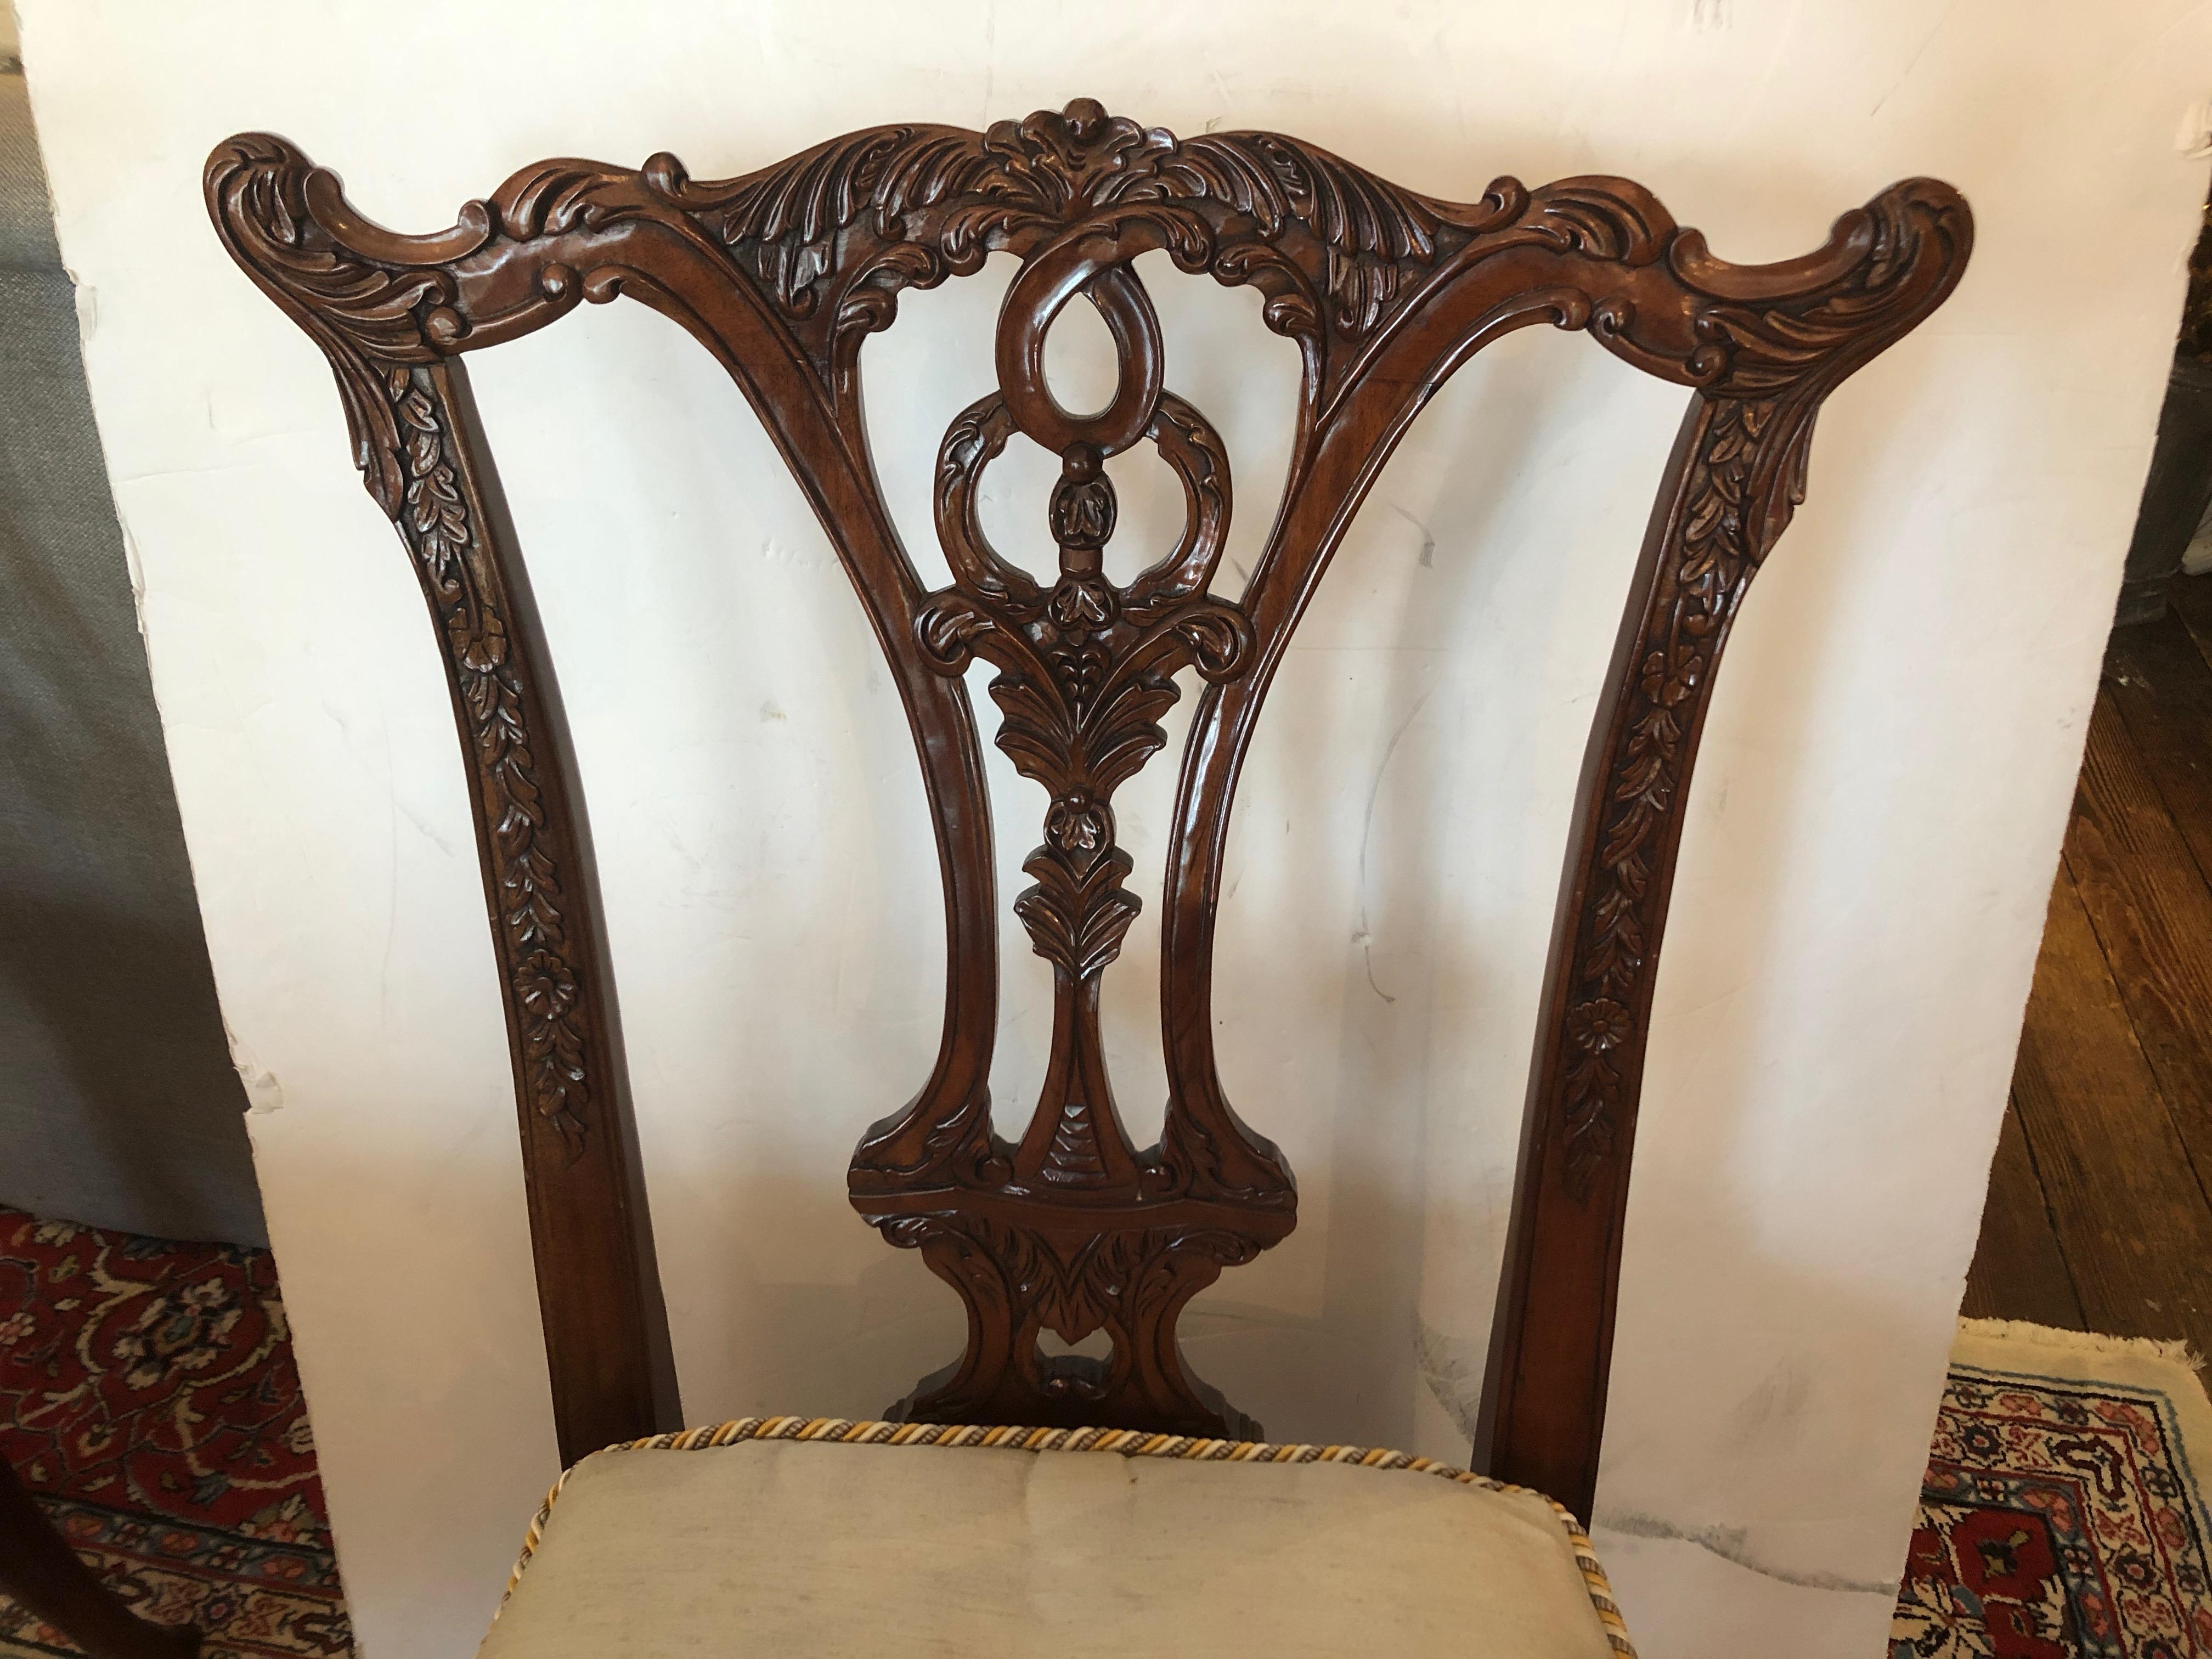 Mahogany Super Elegant Georgian Style Dining Table with 6 Chippendale Style Chairs